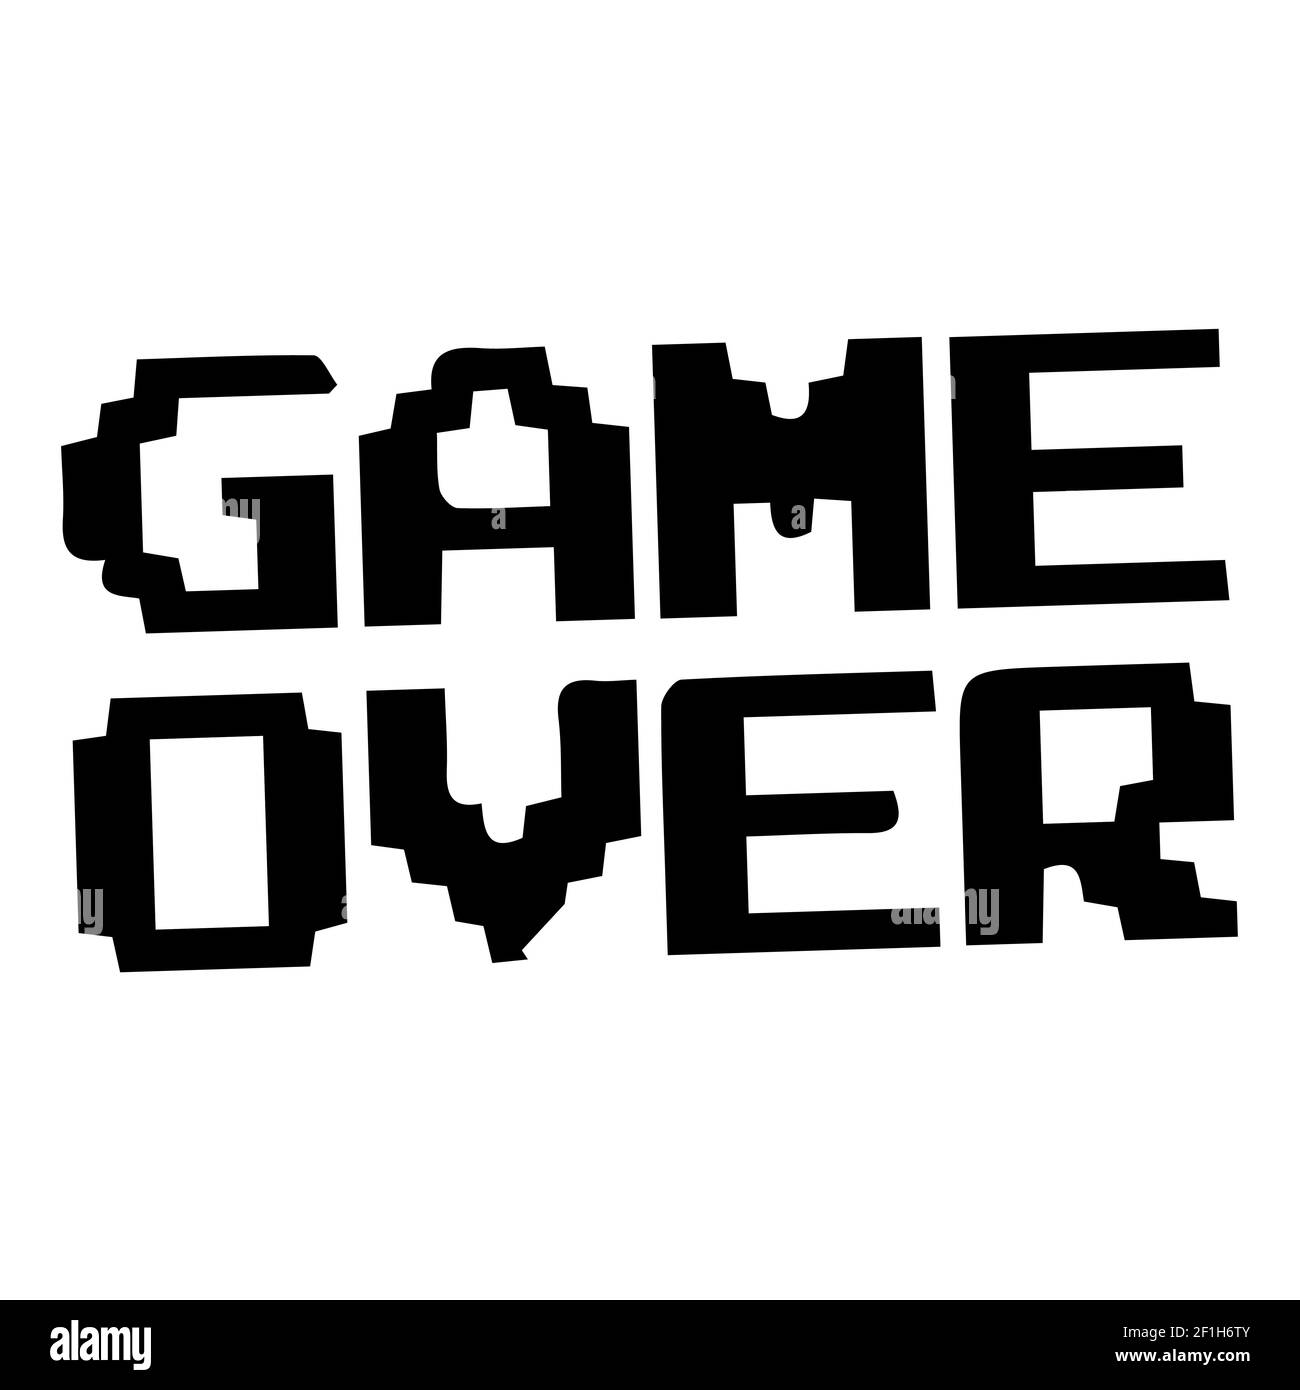 8-bit Pixel Game Over Message. pixel art style icons, element design for logo, app, web, sticker. Video game sprite. Isolated vector illustration. Stock Vector